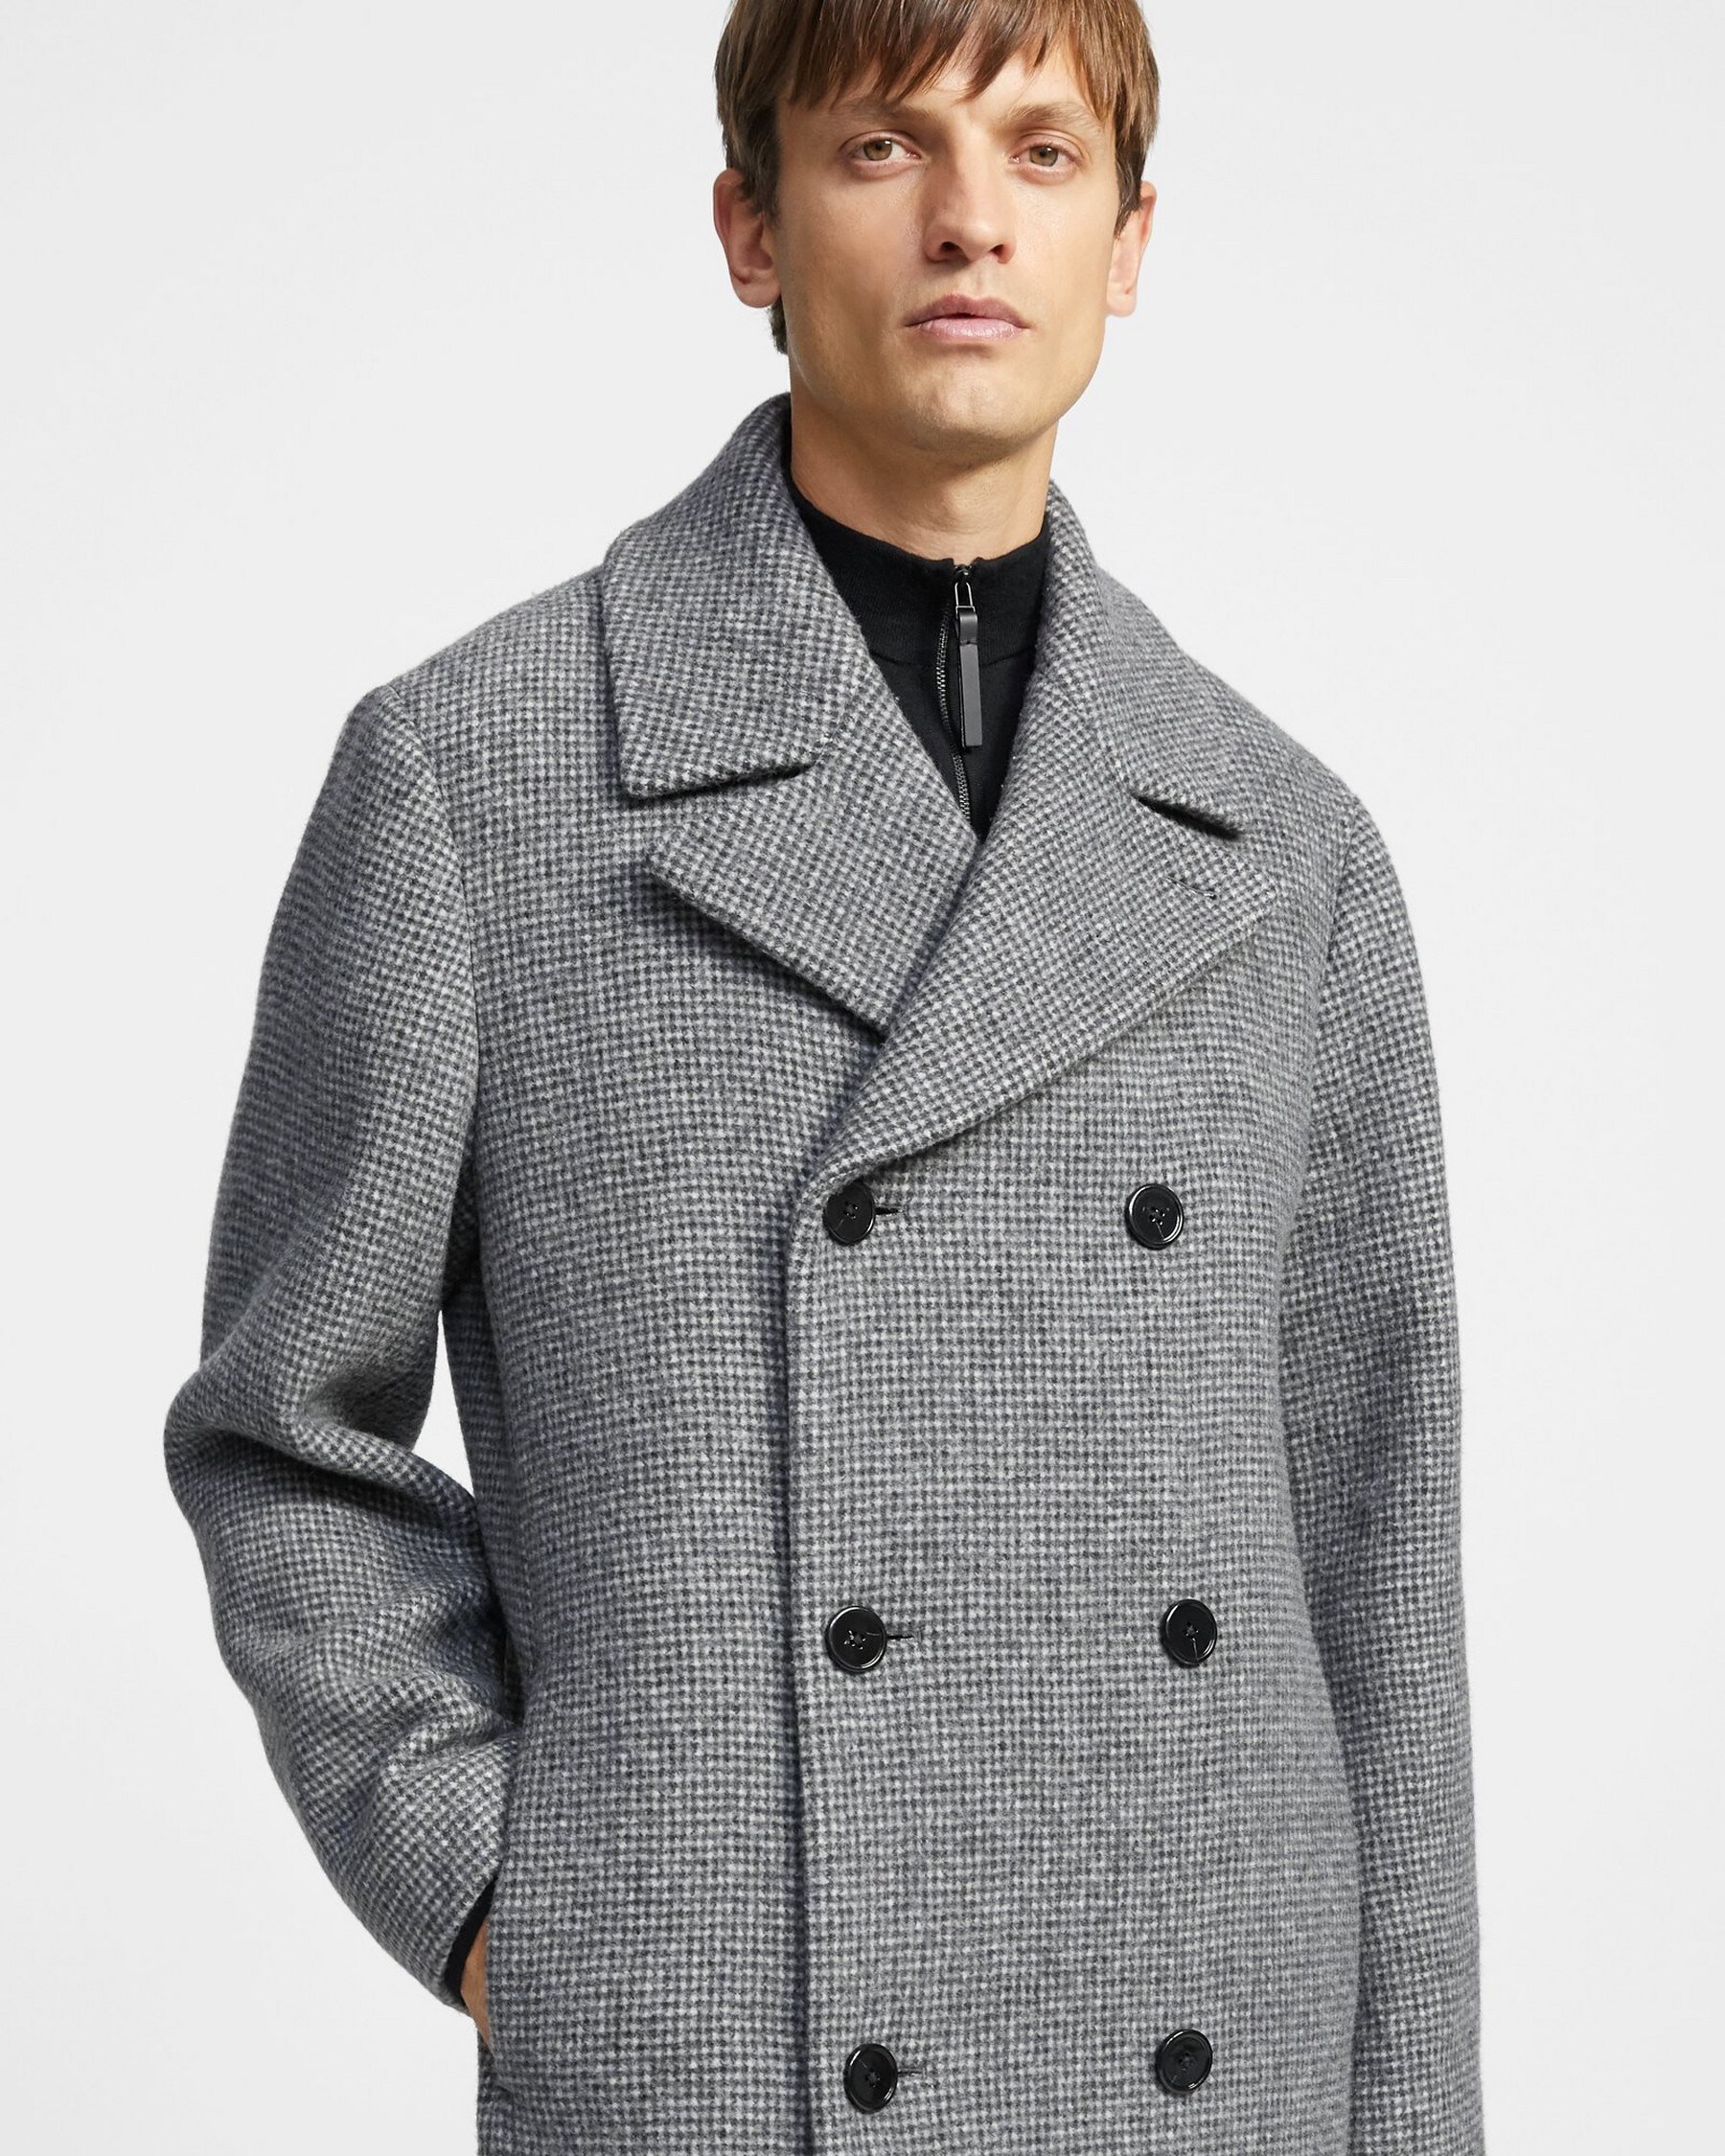 Dalston Coat in Wool-Cashmere | Theory